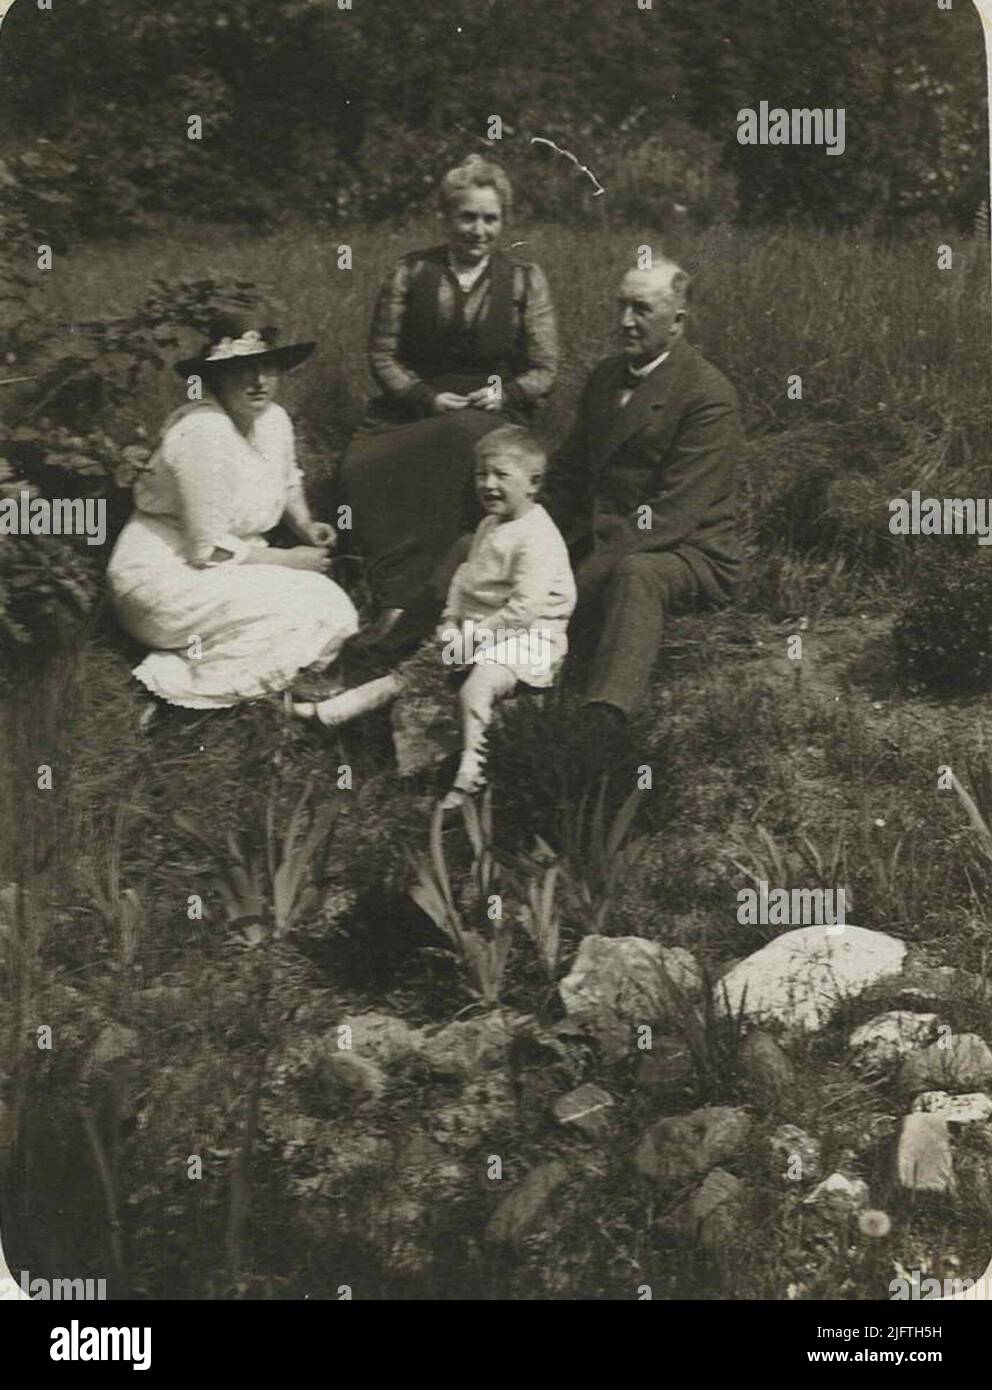 Family photo with Joachimus (Chiem) van Houwinge (24/03/1859 - 22/02/1936), coal trader, large landowner of the area on and adjacent to the Kwakkenberg and founder of the Villapark, wife Sophia Frederika Hamerslag (05/02// 1862 - 07/10/1936) and (left), youngest daughter Johanna Christina Hallo -van Houwinge (11/12/1891 - 21/07/1974), with her only child, Jacobus Winus Johannes (Jaap) Hello (19/19/ 05/1917 - 26/04/1981). Van Houwinge called the (forest) roads on the Kwakkenberg to his wife and three daughters. During the transfer to the municipality of Nijmegen in 1916, the names Sophiaweg, Ad Stock Photo